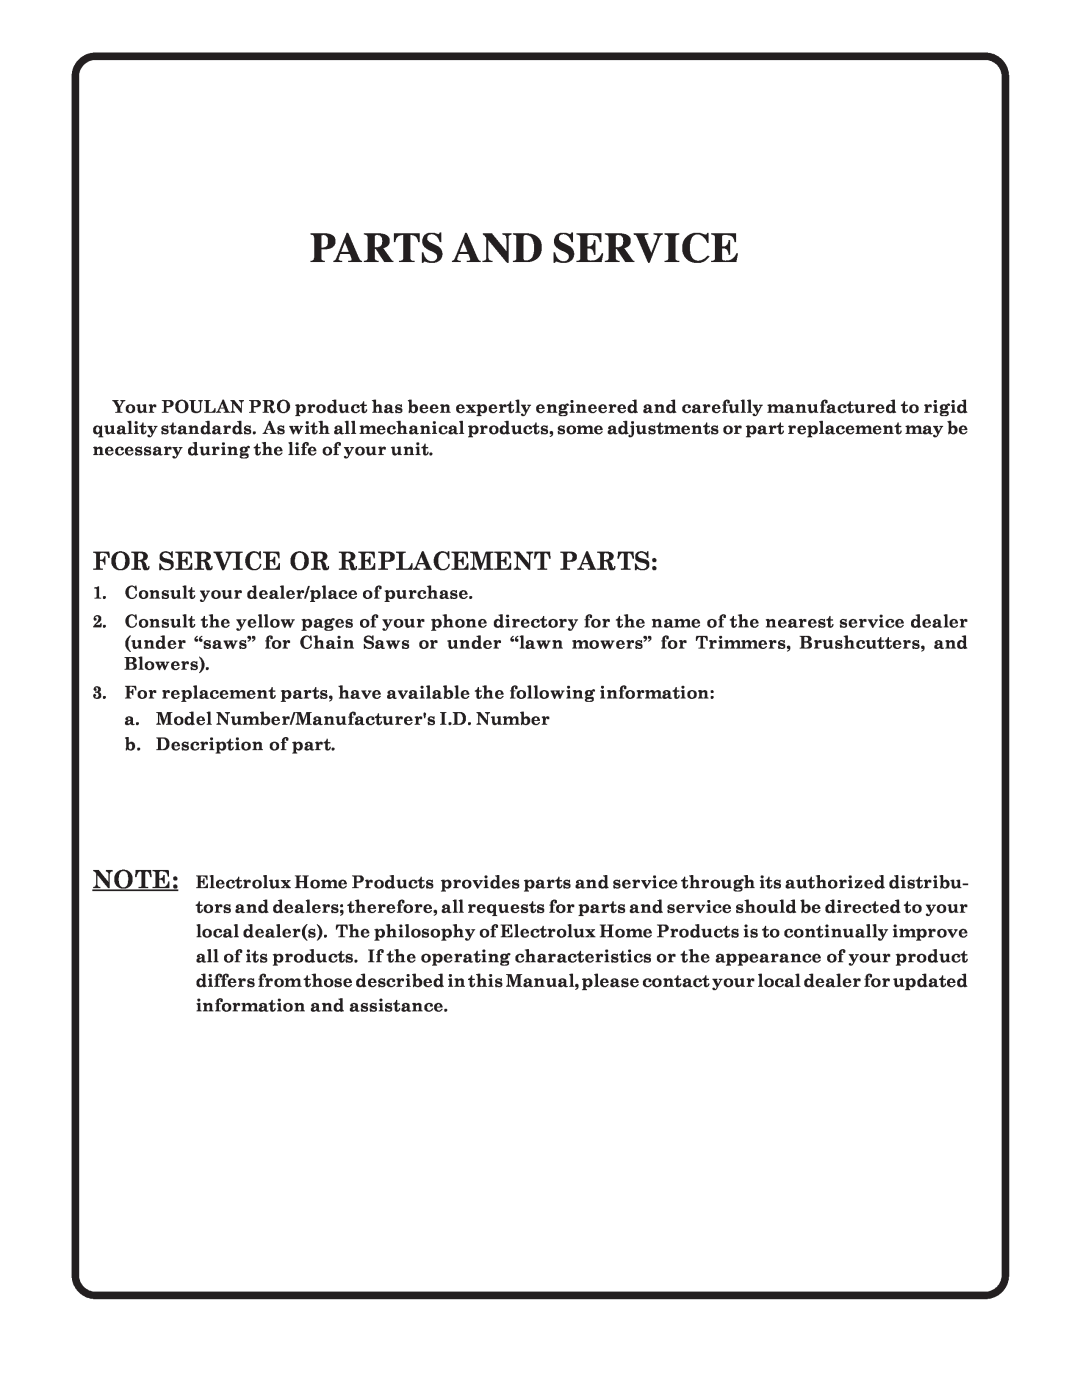 Poulan 176873 owner manual Parts And Service, For Service Or Replacement Parts 